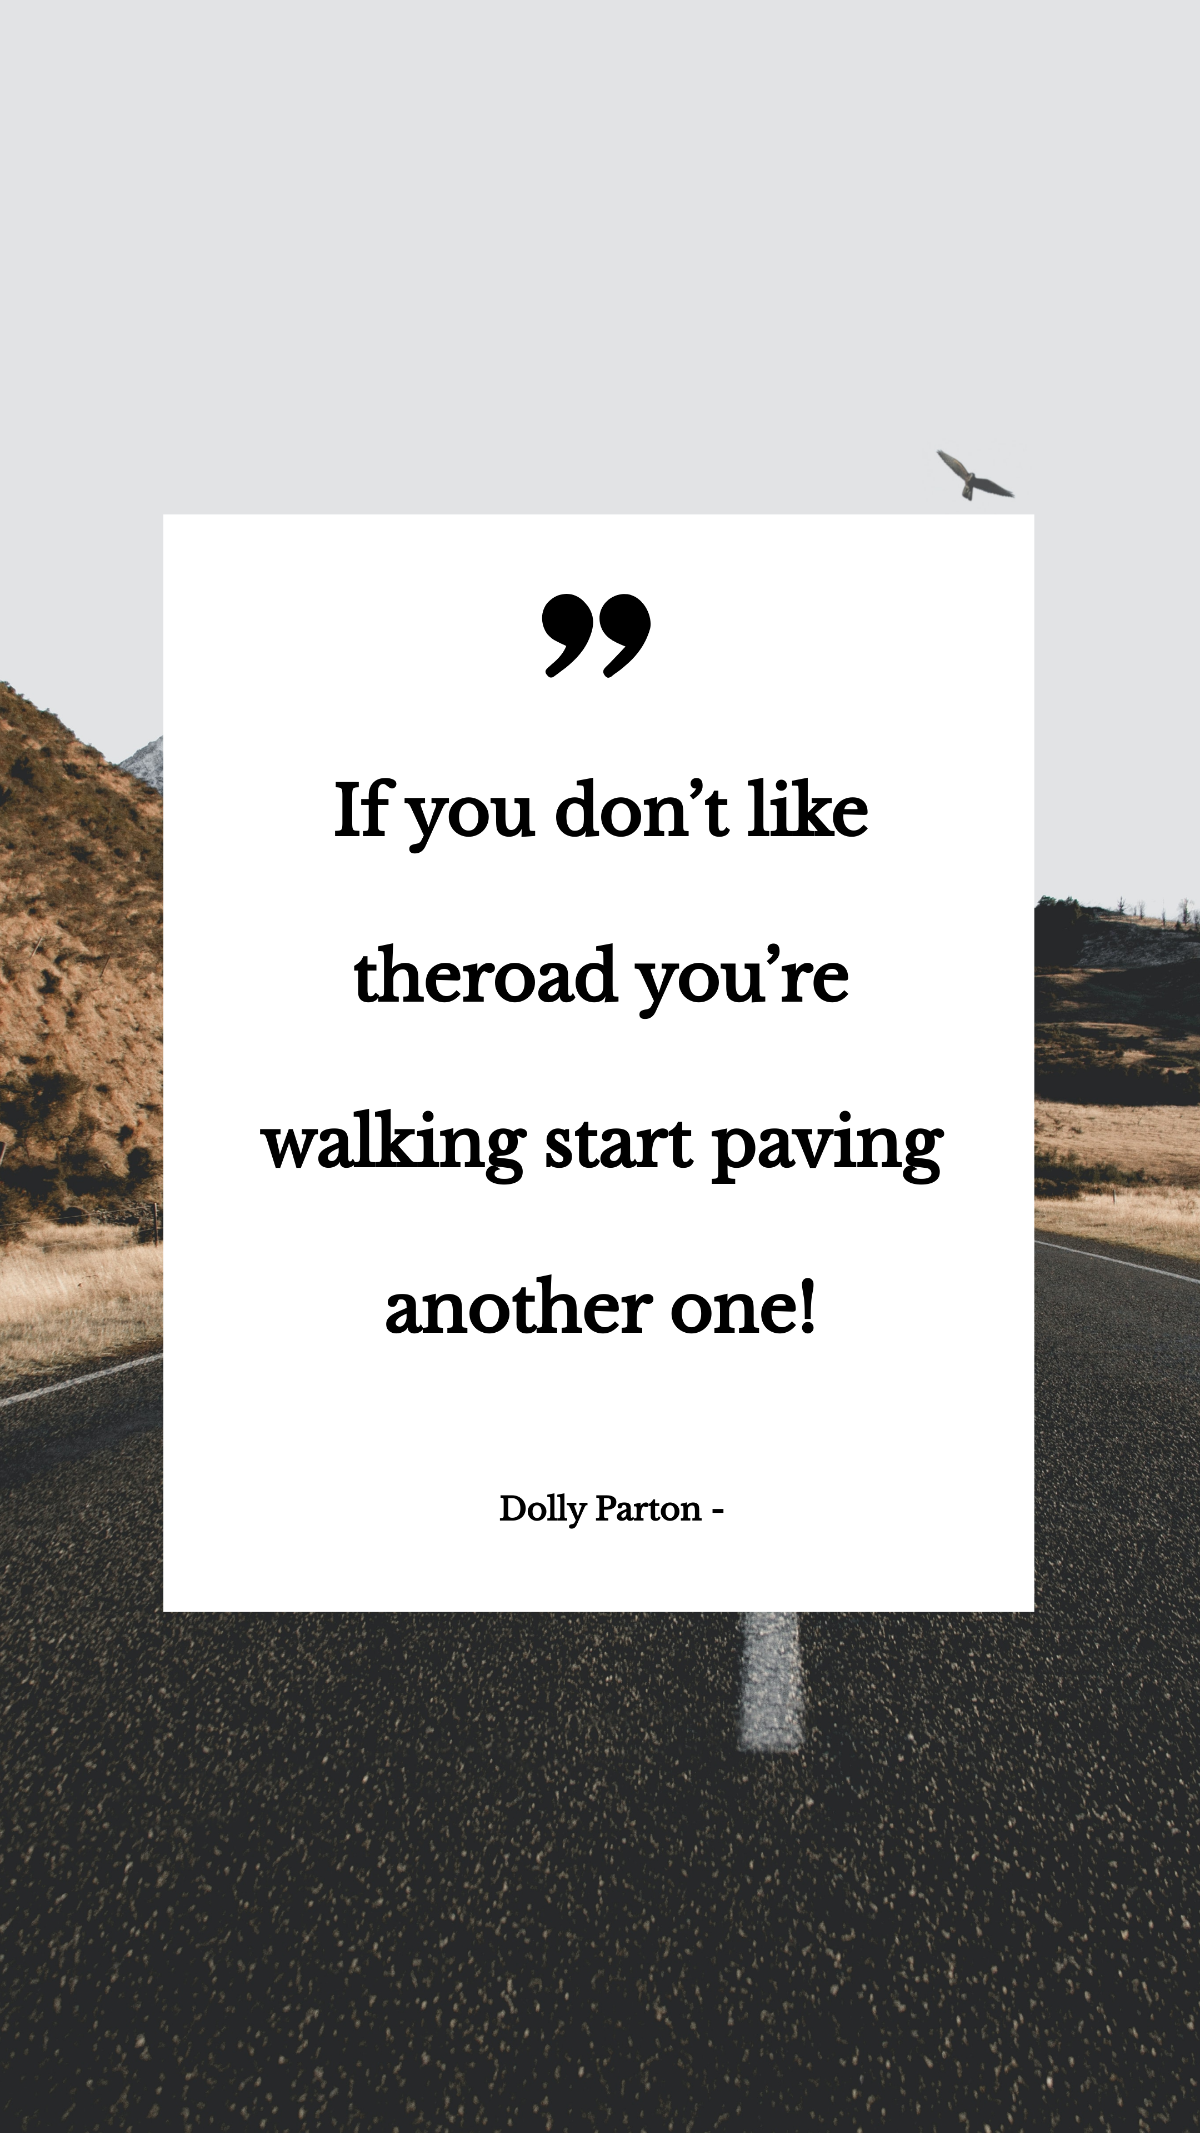 Dolly Parton - If you don’t like the road you’re walking start paving another one! Template